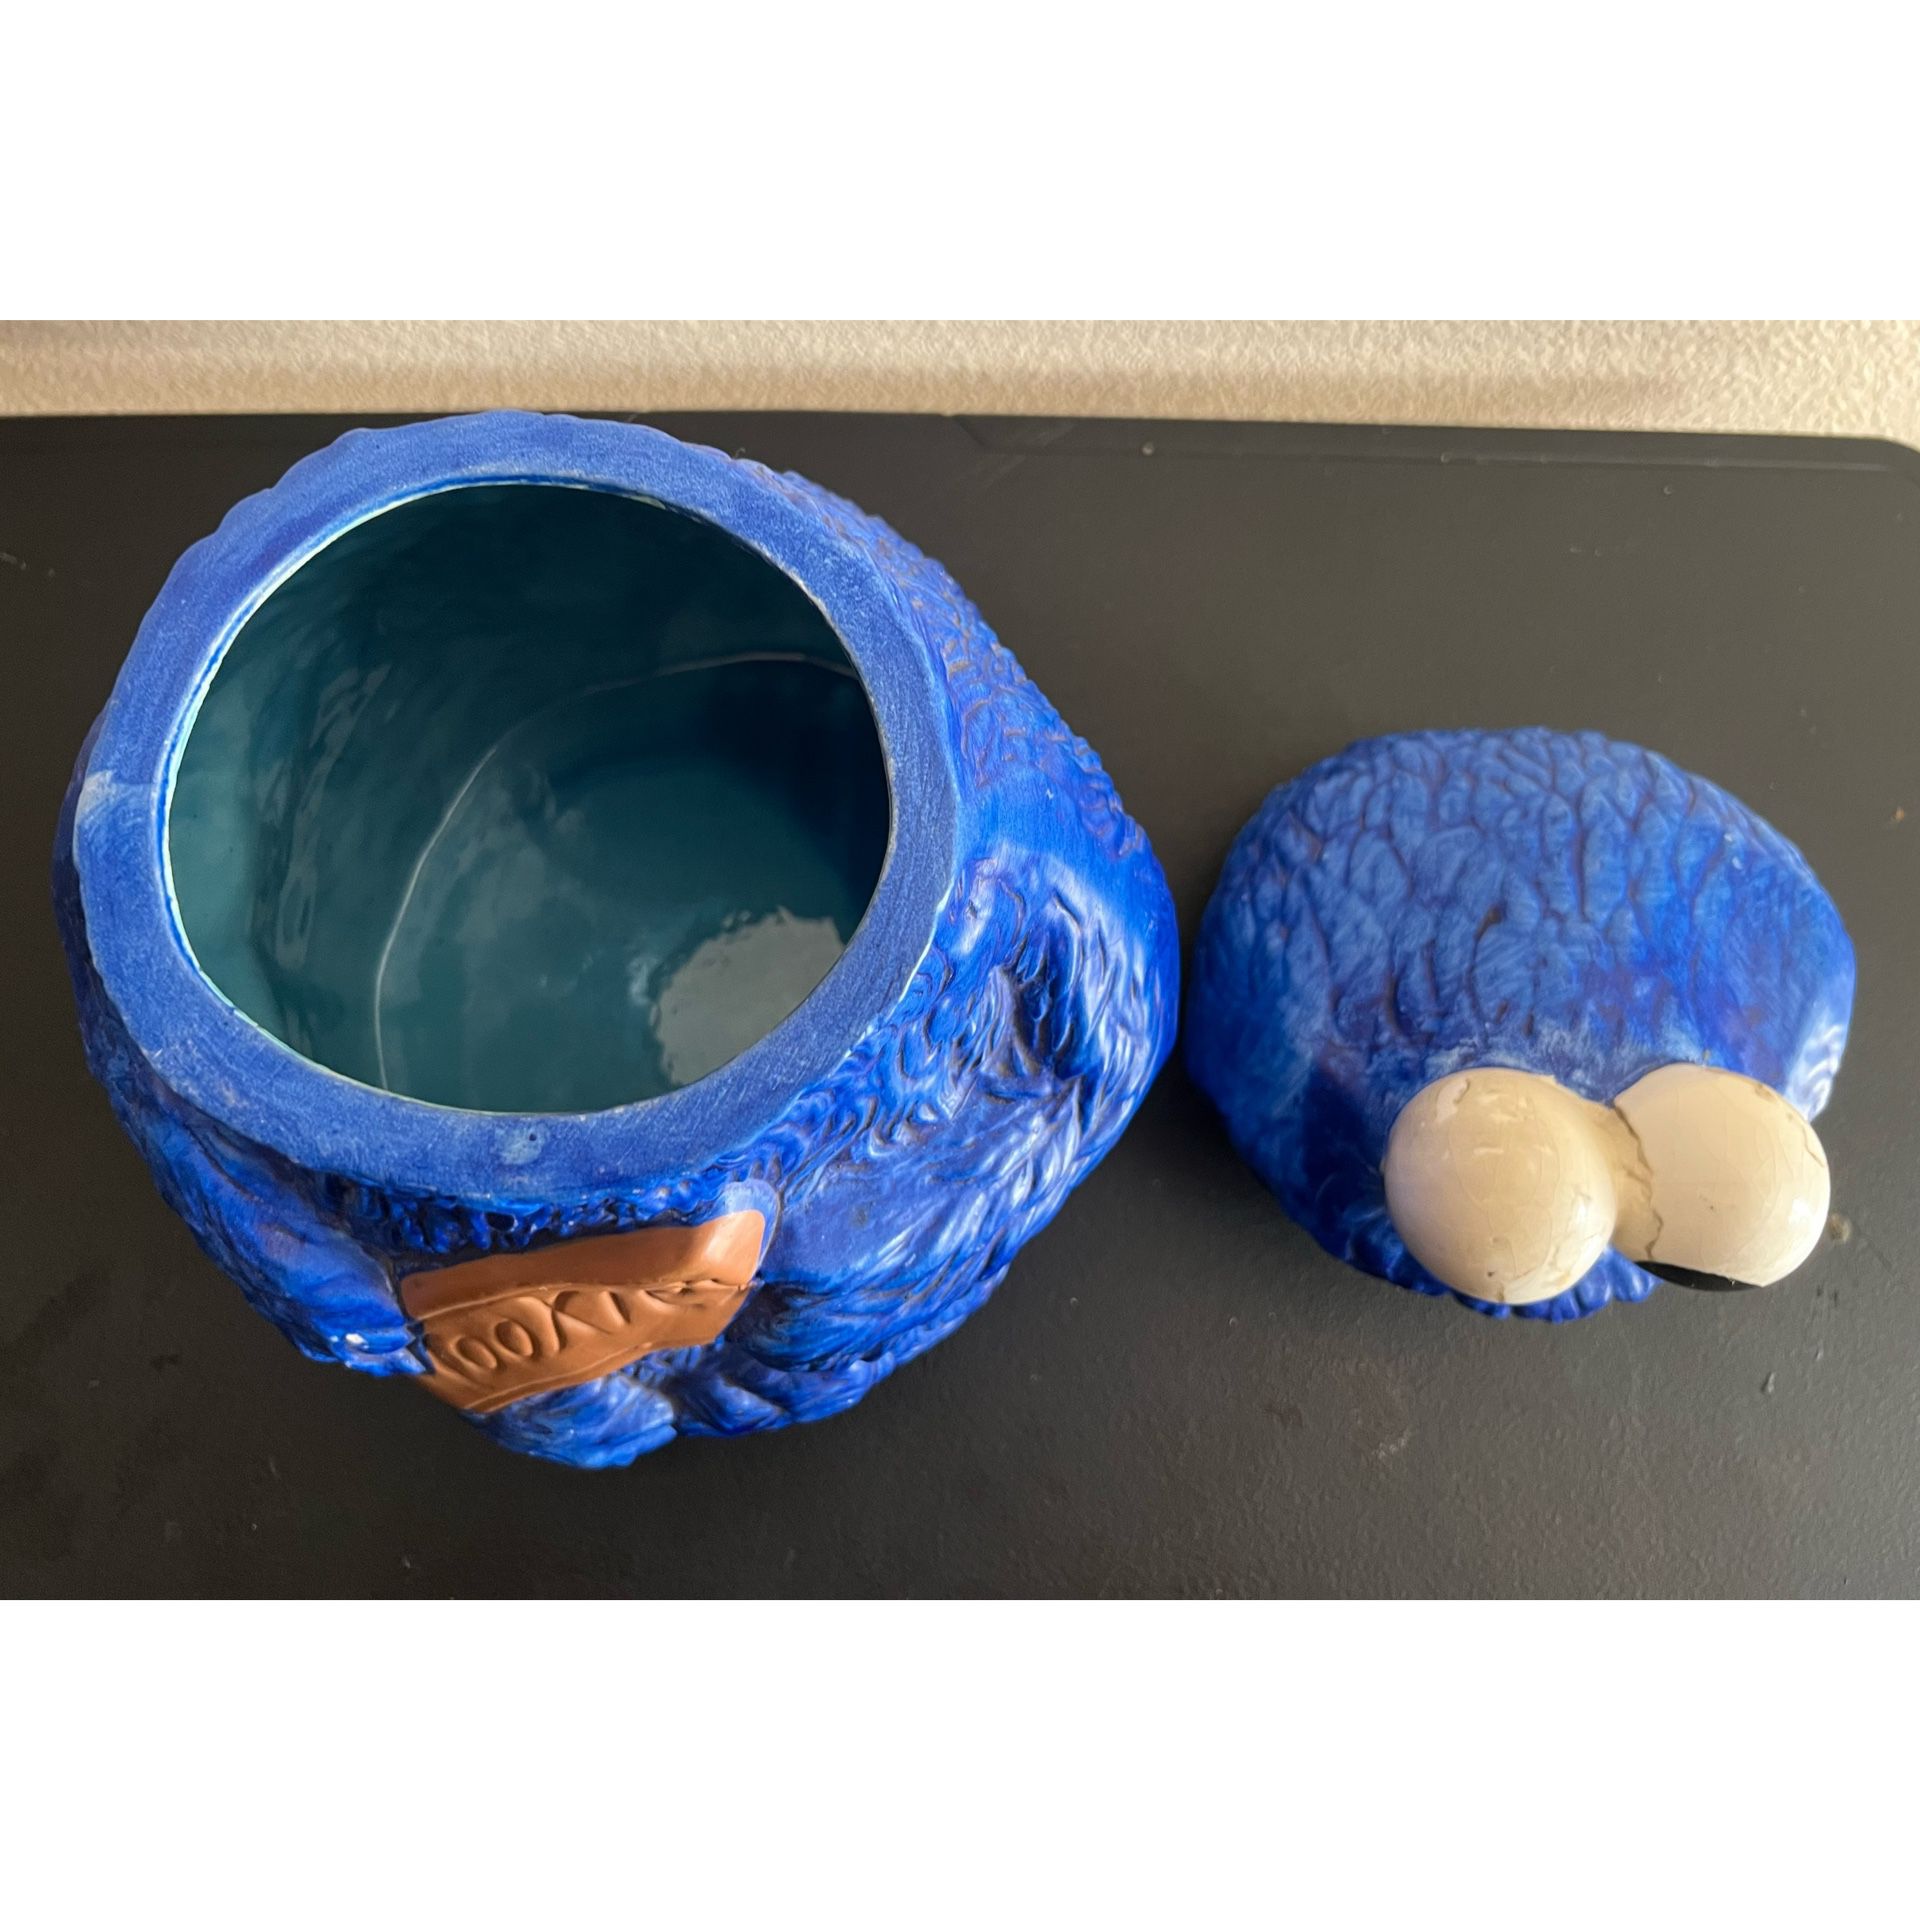 RARE Vintage Cookie Monster Cookie Jar Muppet's Cookie Chef Demand Mar -  collectibles - by owner - sale - craigslist